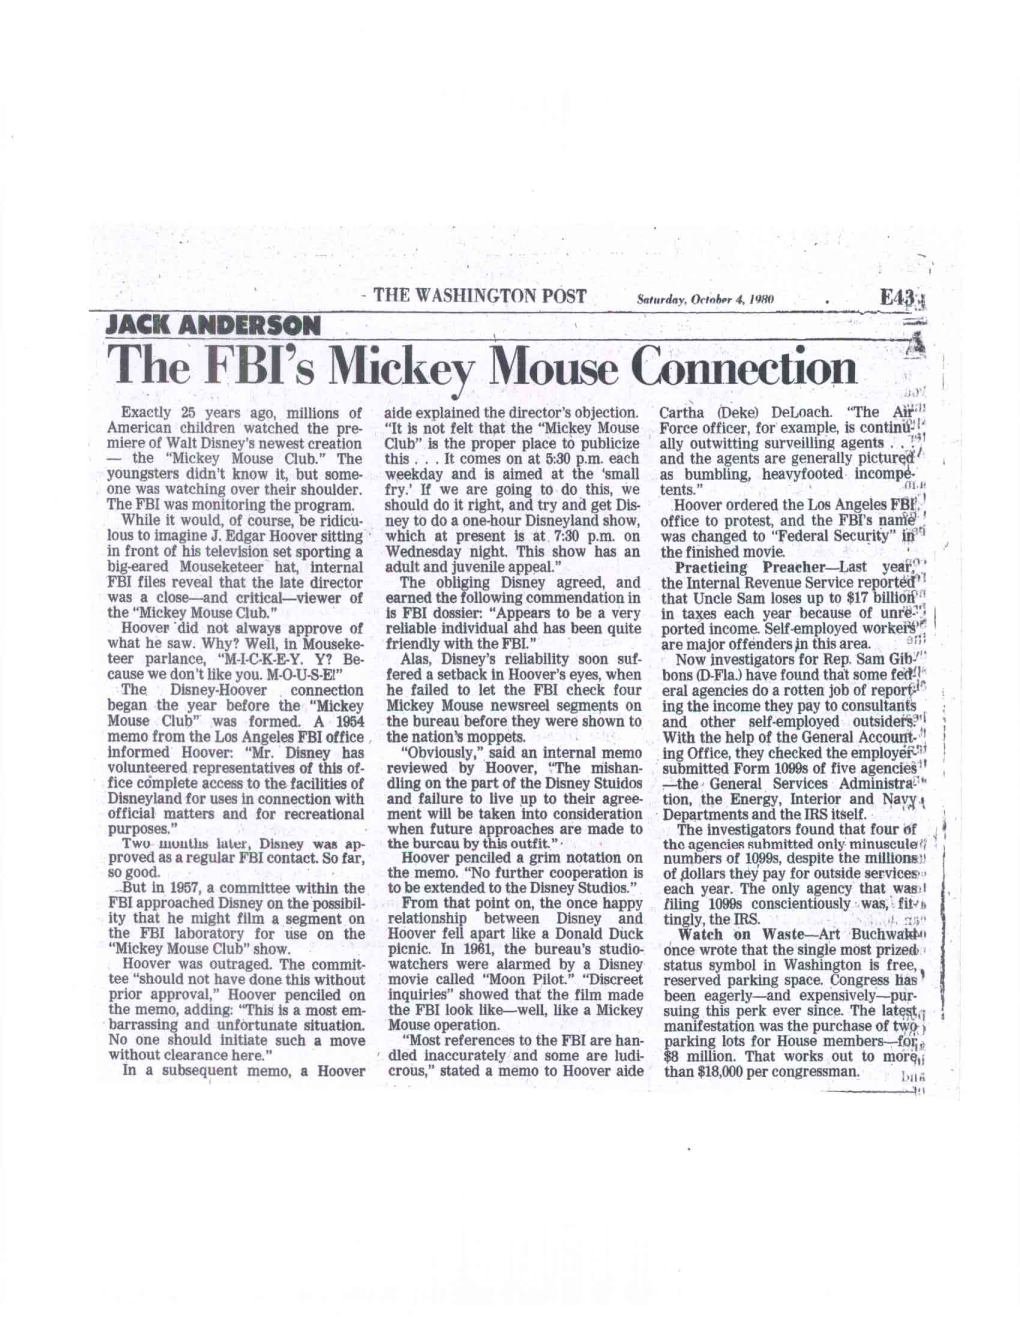 The FBI's Mickey Mouse Connection Exactly 25 Years Ago, Millions of Aide Explained the Director's Objection